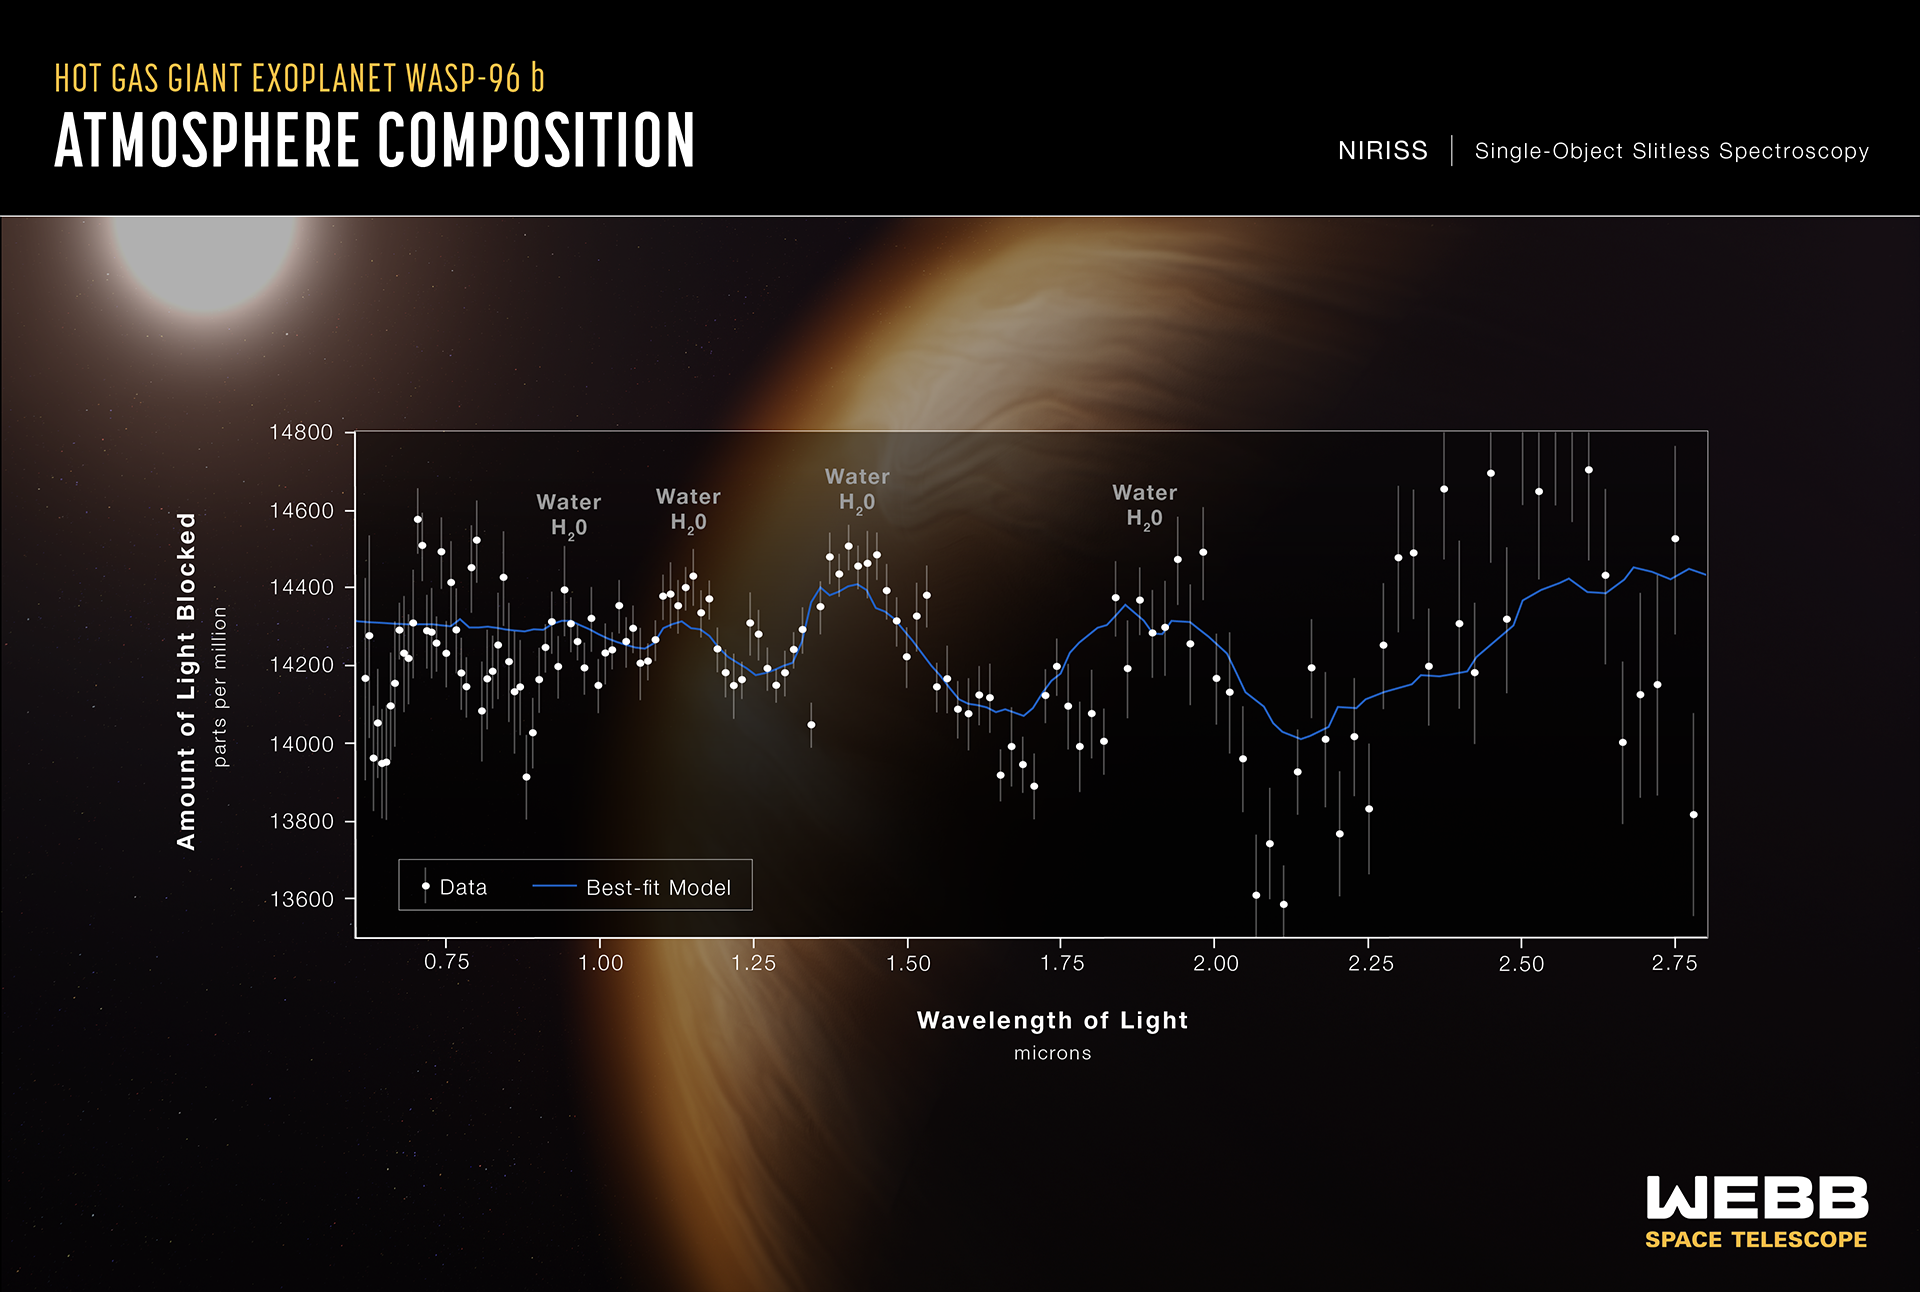 A spectrum showing the molecules in the atmosphere of a giant alien planet.